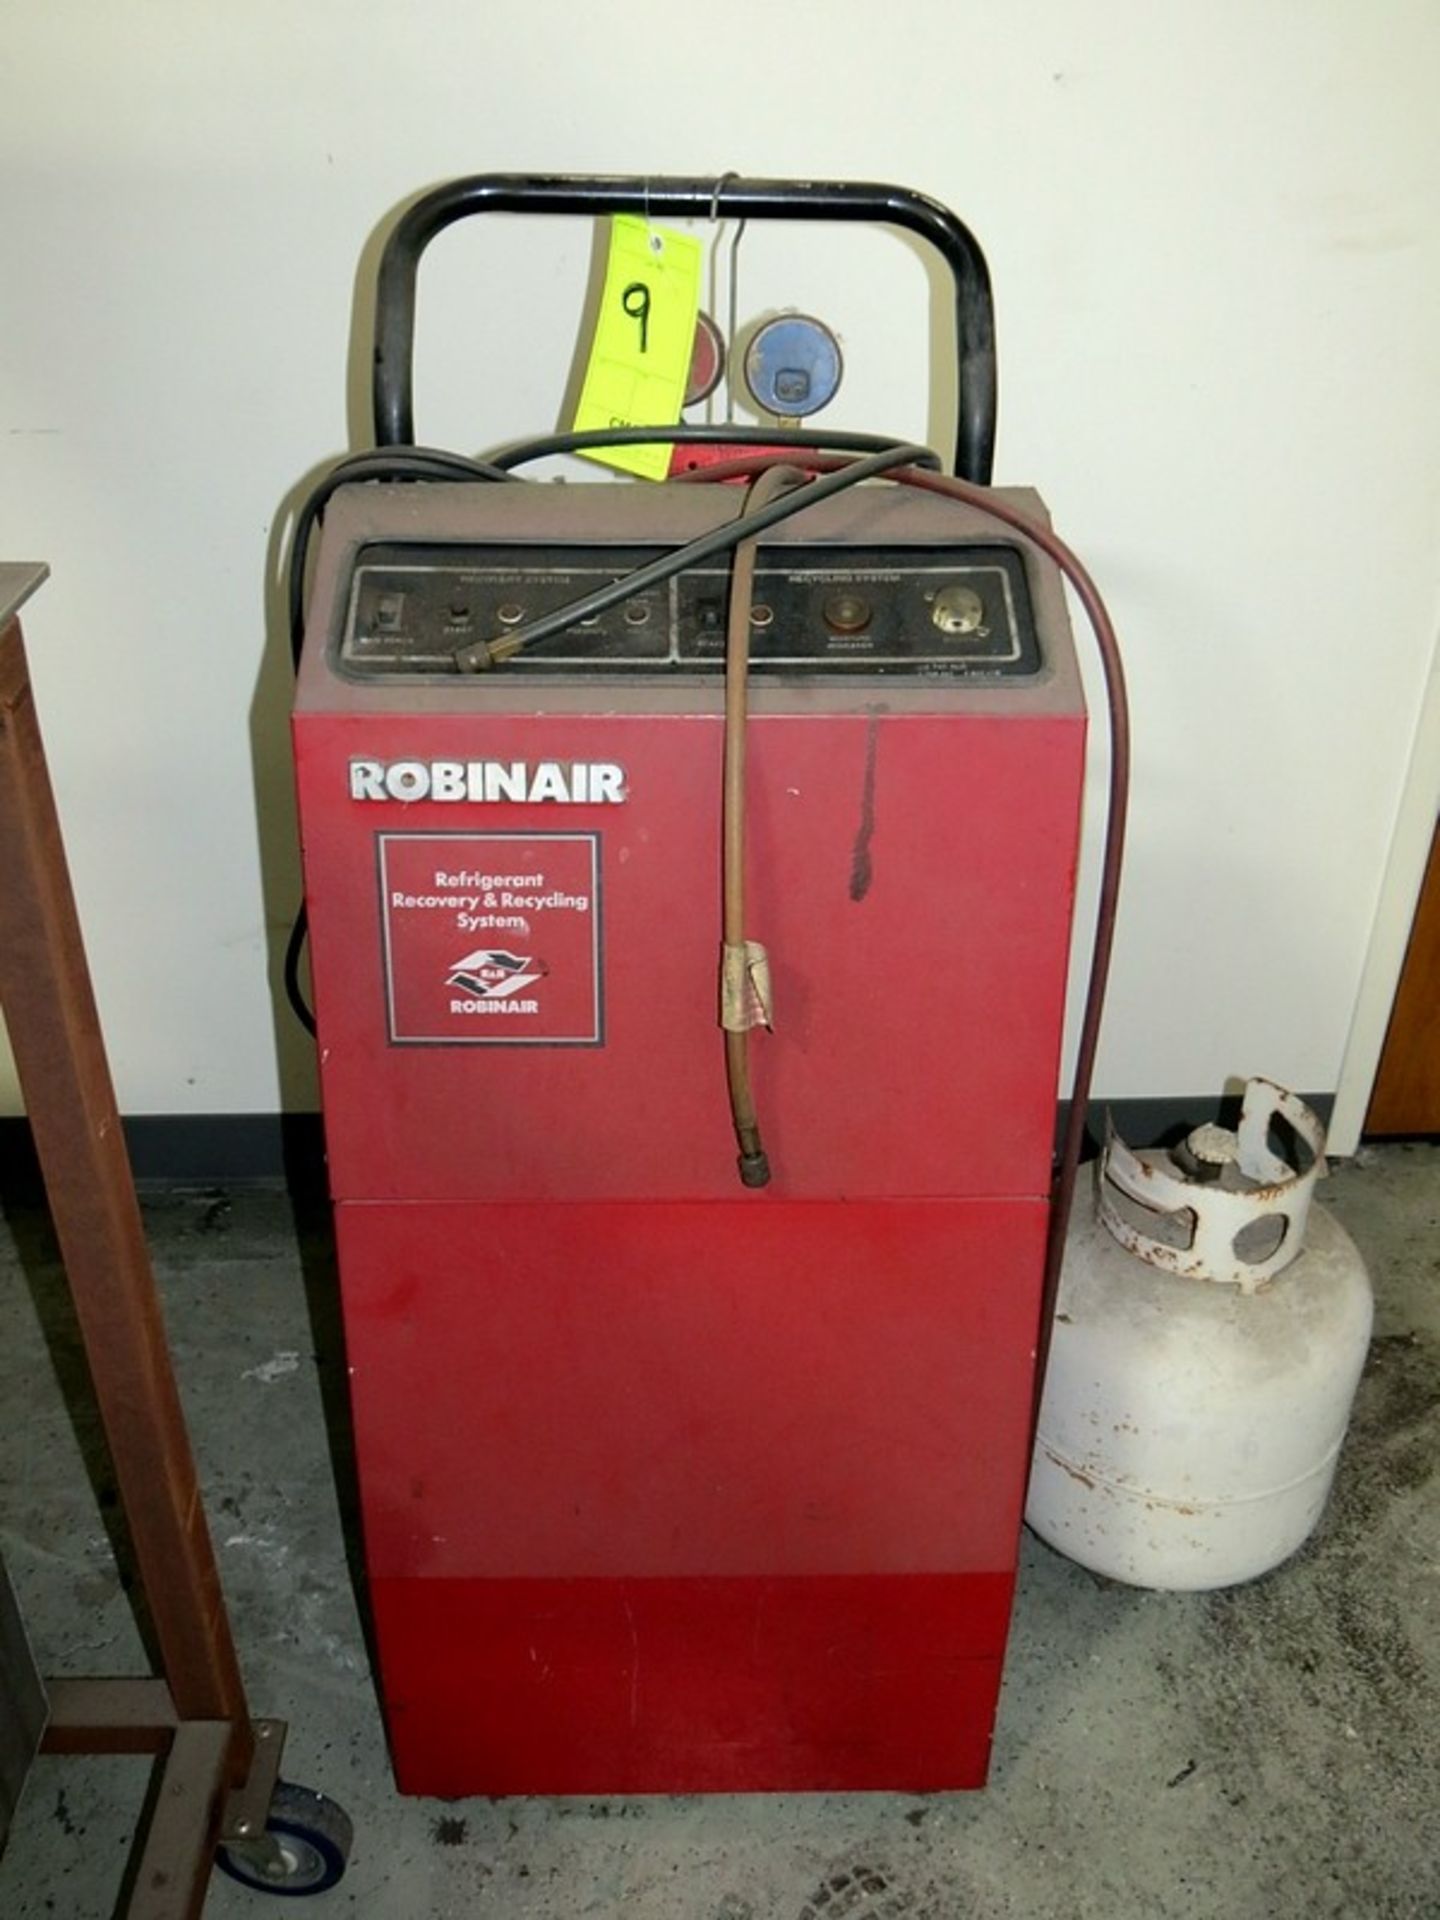 Robinair Refrigerant Recovery & Recycling System, A/C Charger  Mdl. 17350, R-12 Refrigerant Only,